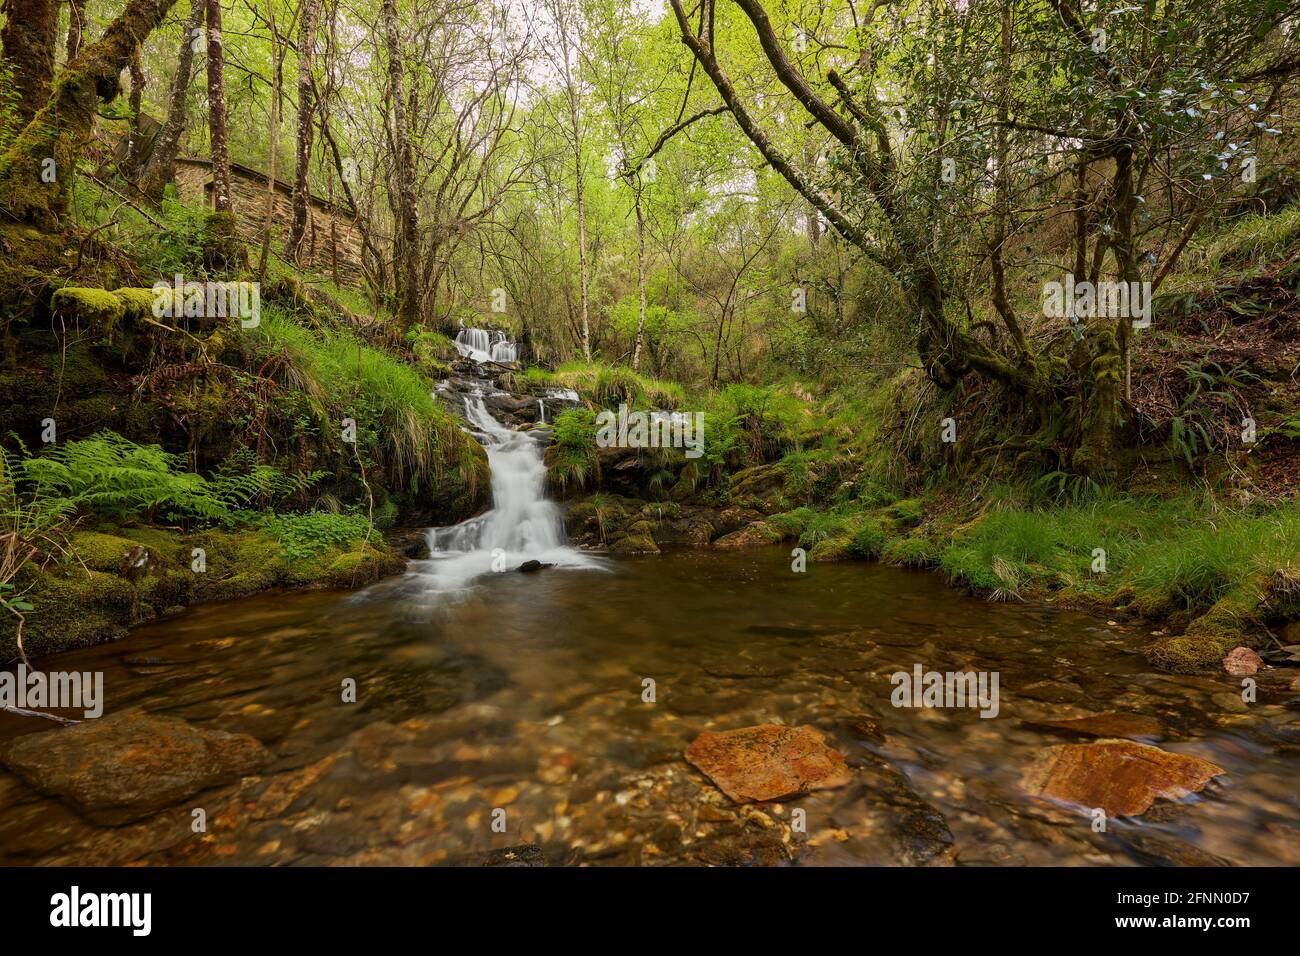 Small waterfall in a forest in the area of Galicia, Spain Stock Photo